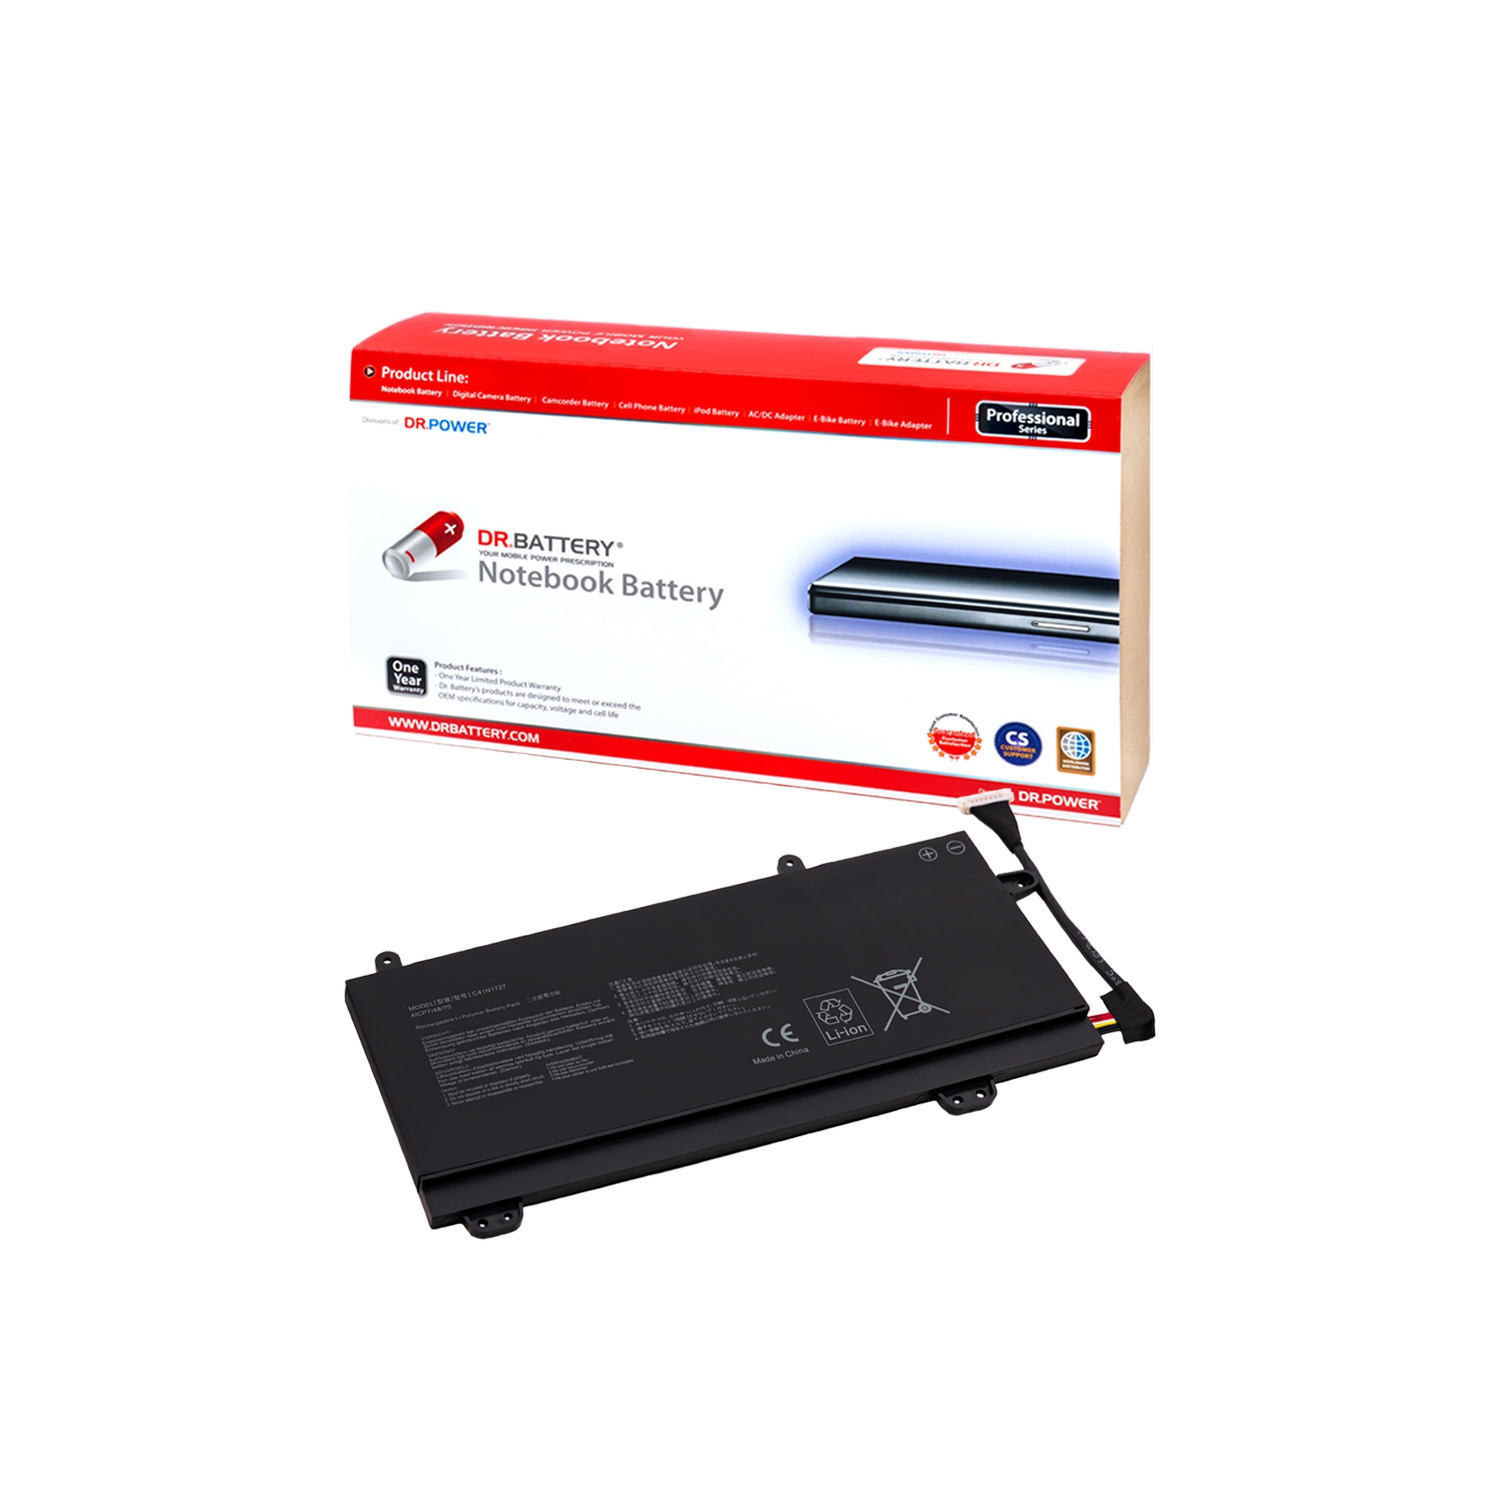 DR. BATTERY Replacement Laptop Battery 0B20002900000 0B200-02900000 4ICP7/48/70 4ICP74870 C41N1727 GU501GM for Asus ROG Zephyrus M GM501 GM501GM [15.4V / 55Wh] **Free Shipping**